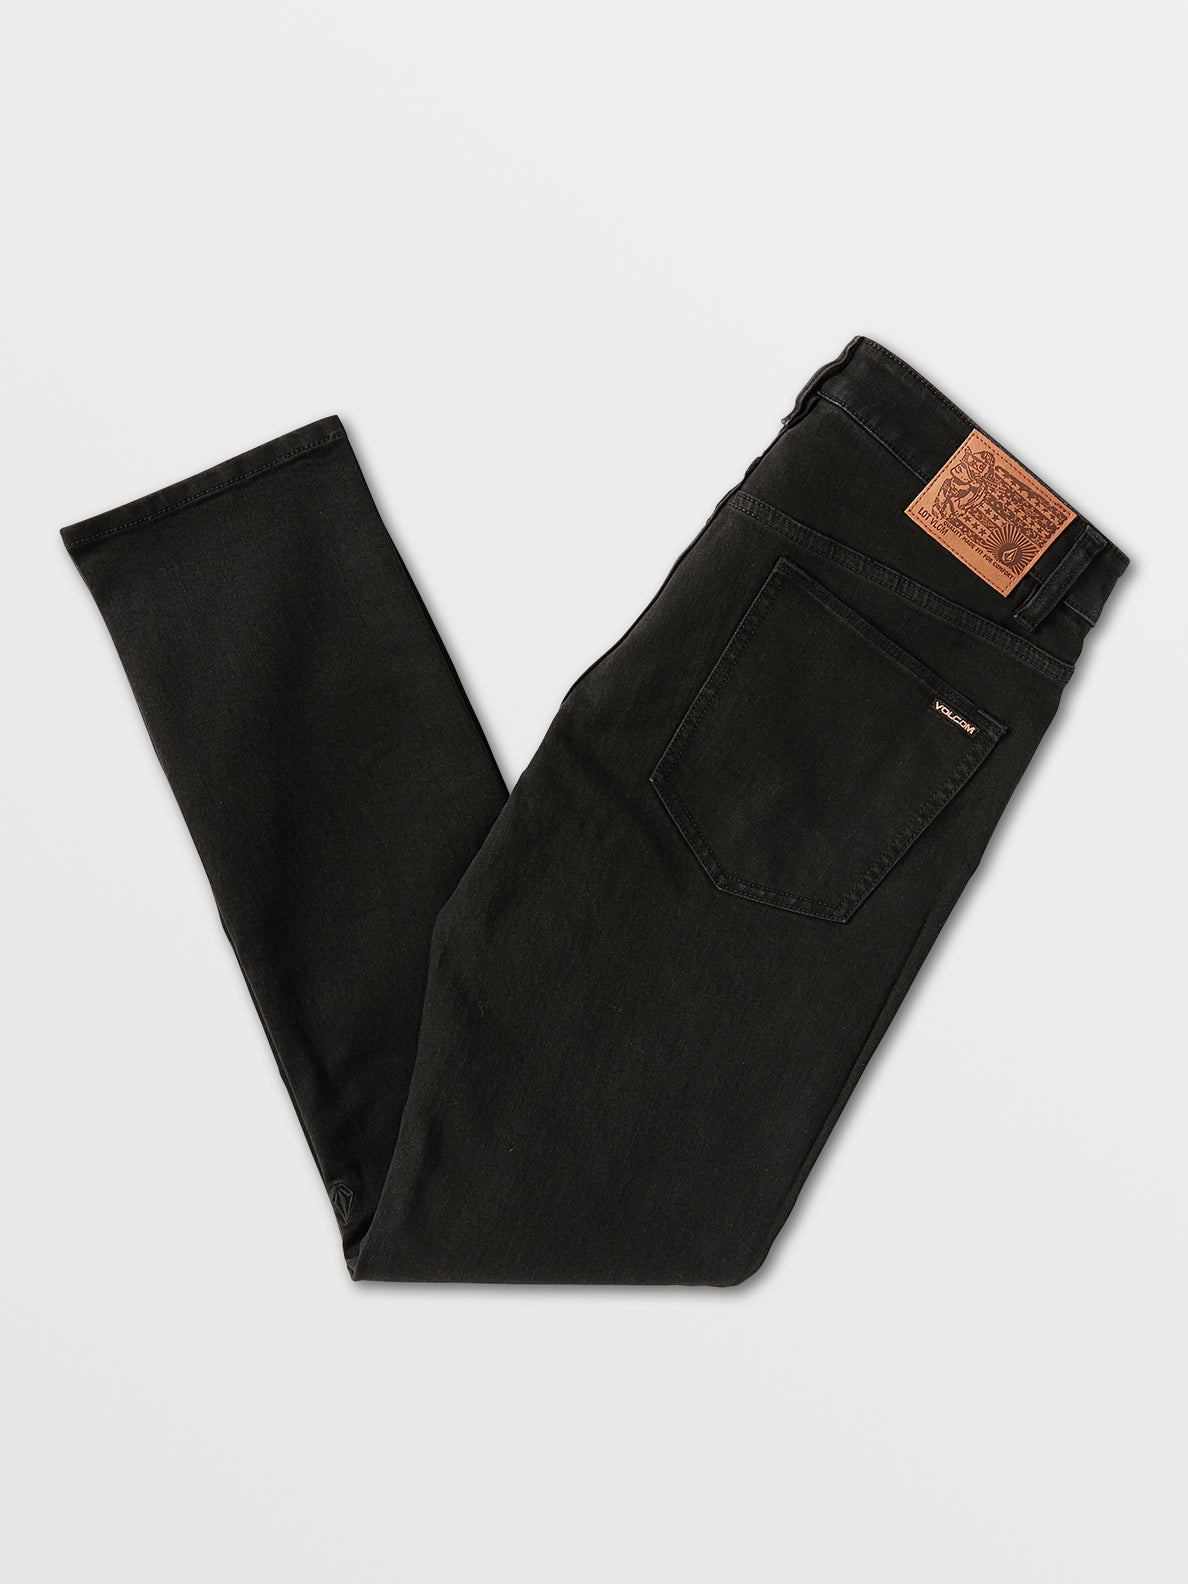 2 X Vorta Tapered Jeans - Black Out (A1932101_BKO) [B]